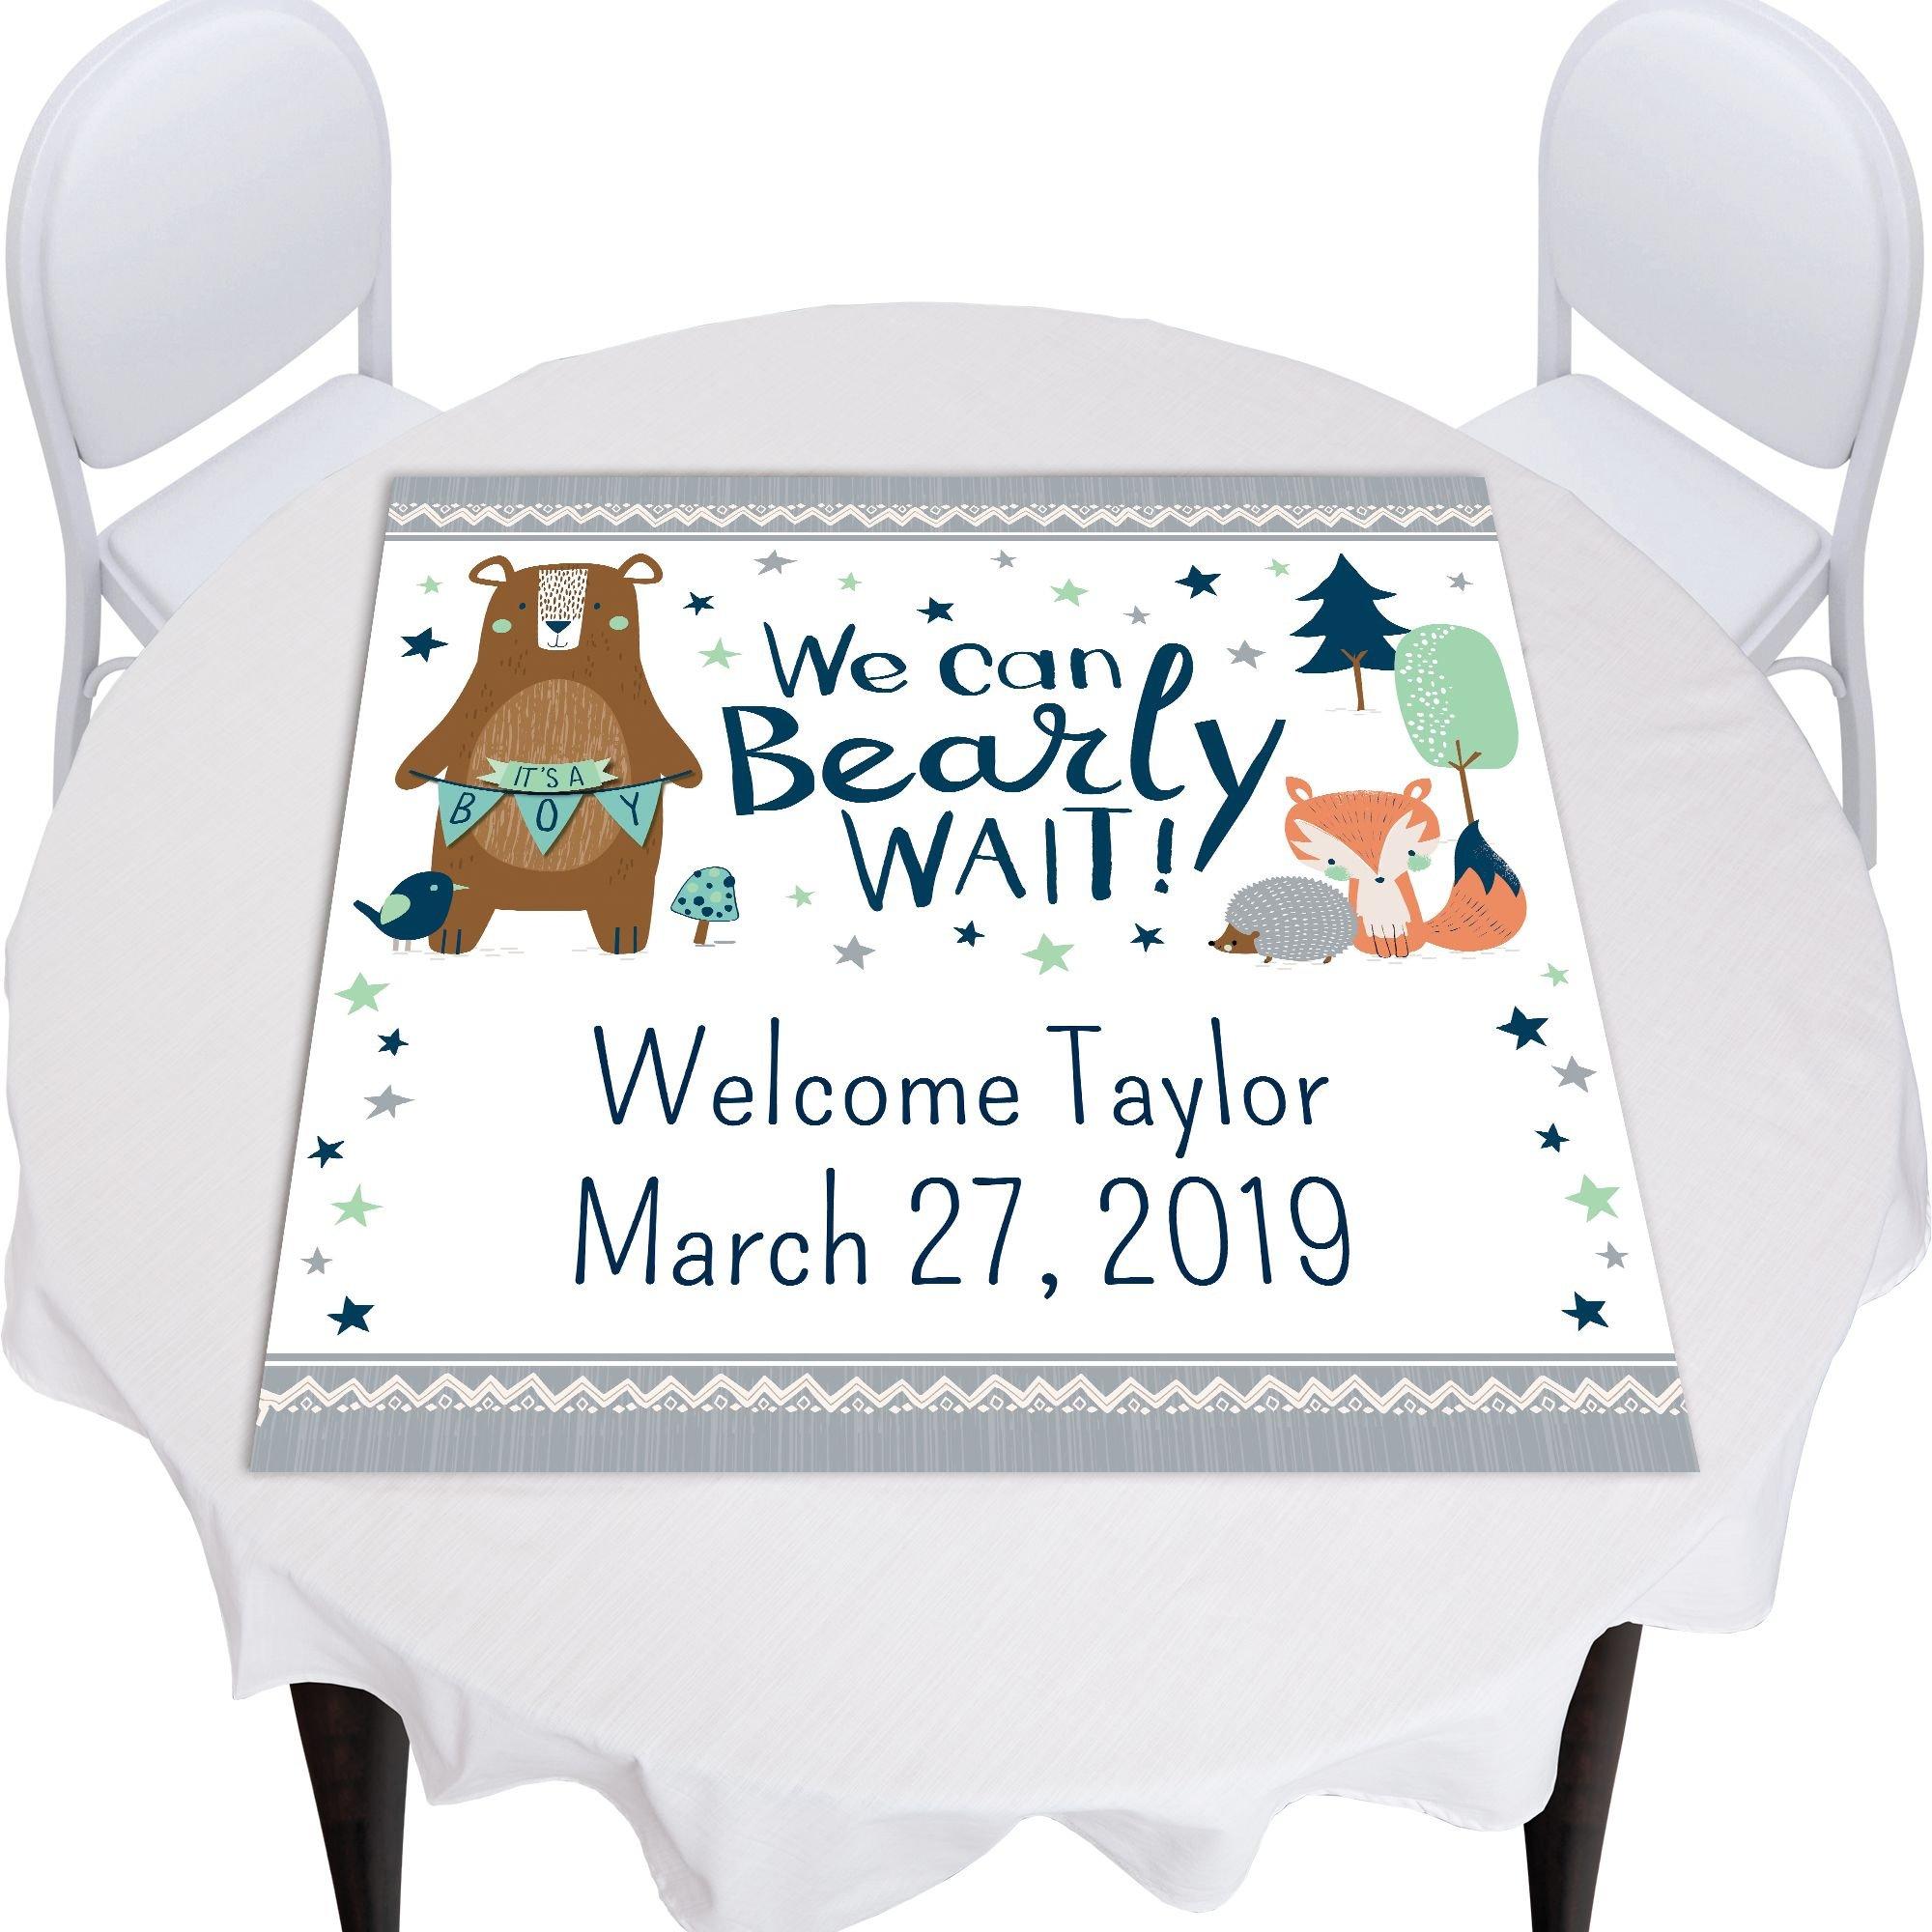 30 EDITABLE Baby Shower Games - Bearly Wait Baby Shower Collection